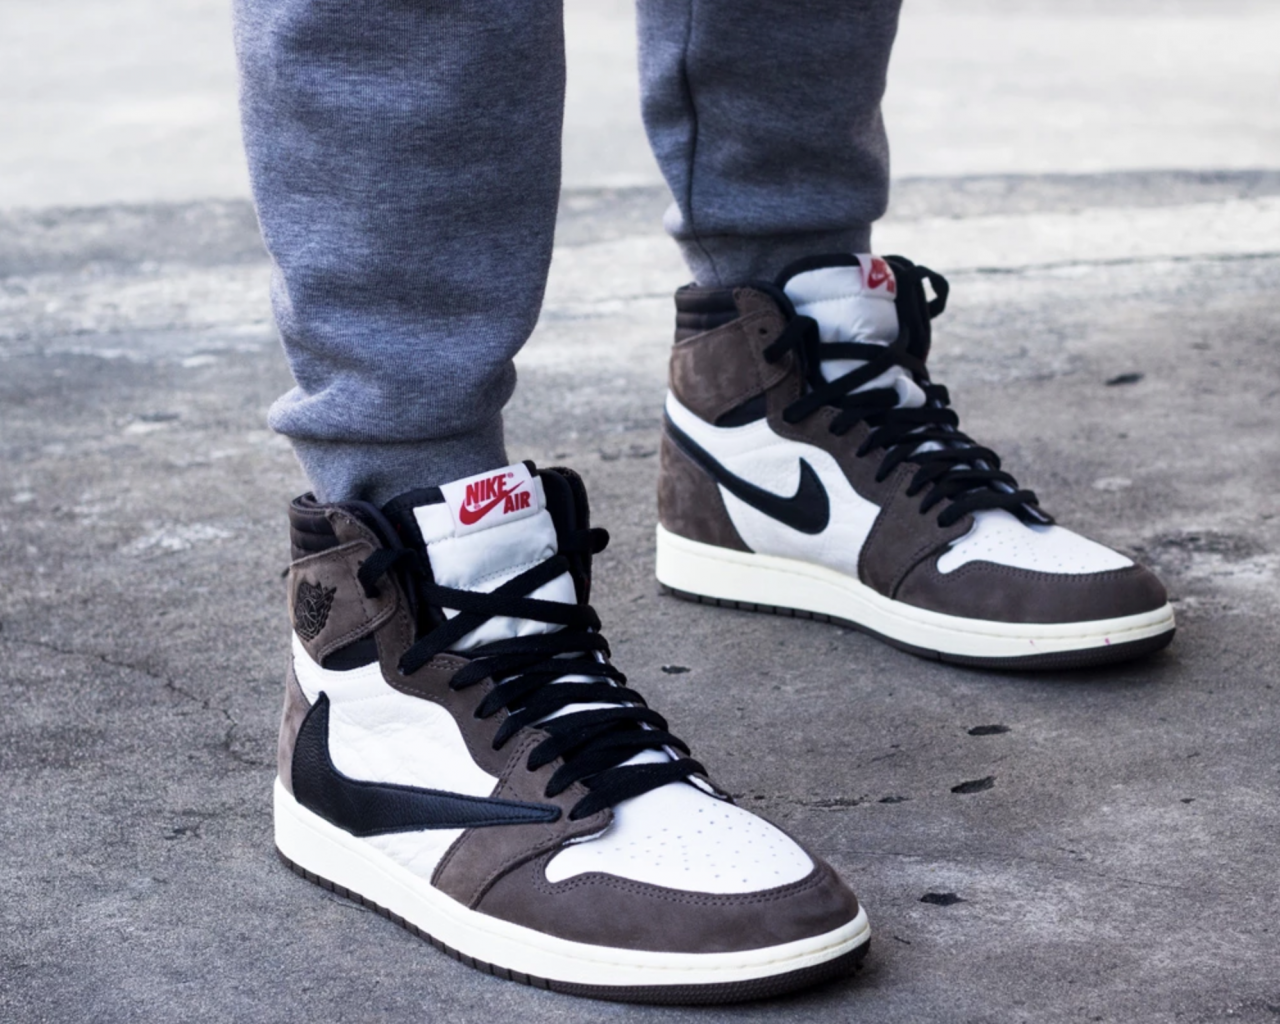 Free download Discover the new image of the Air Jordan 1 Cactus